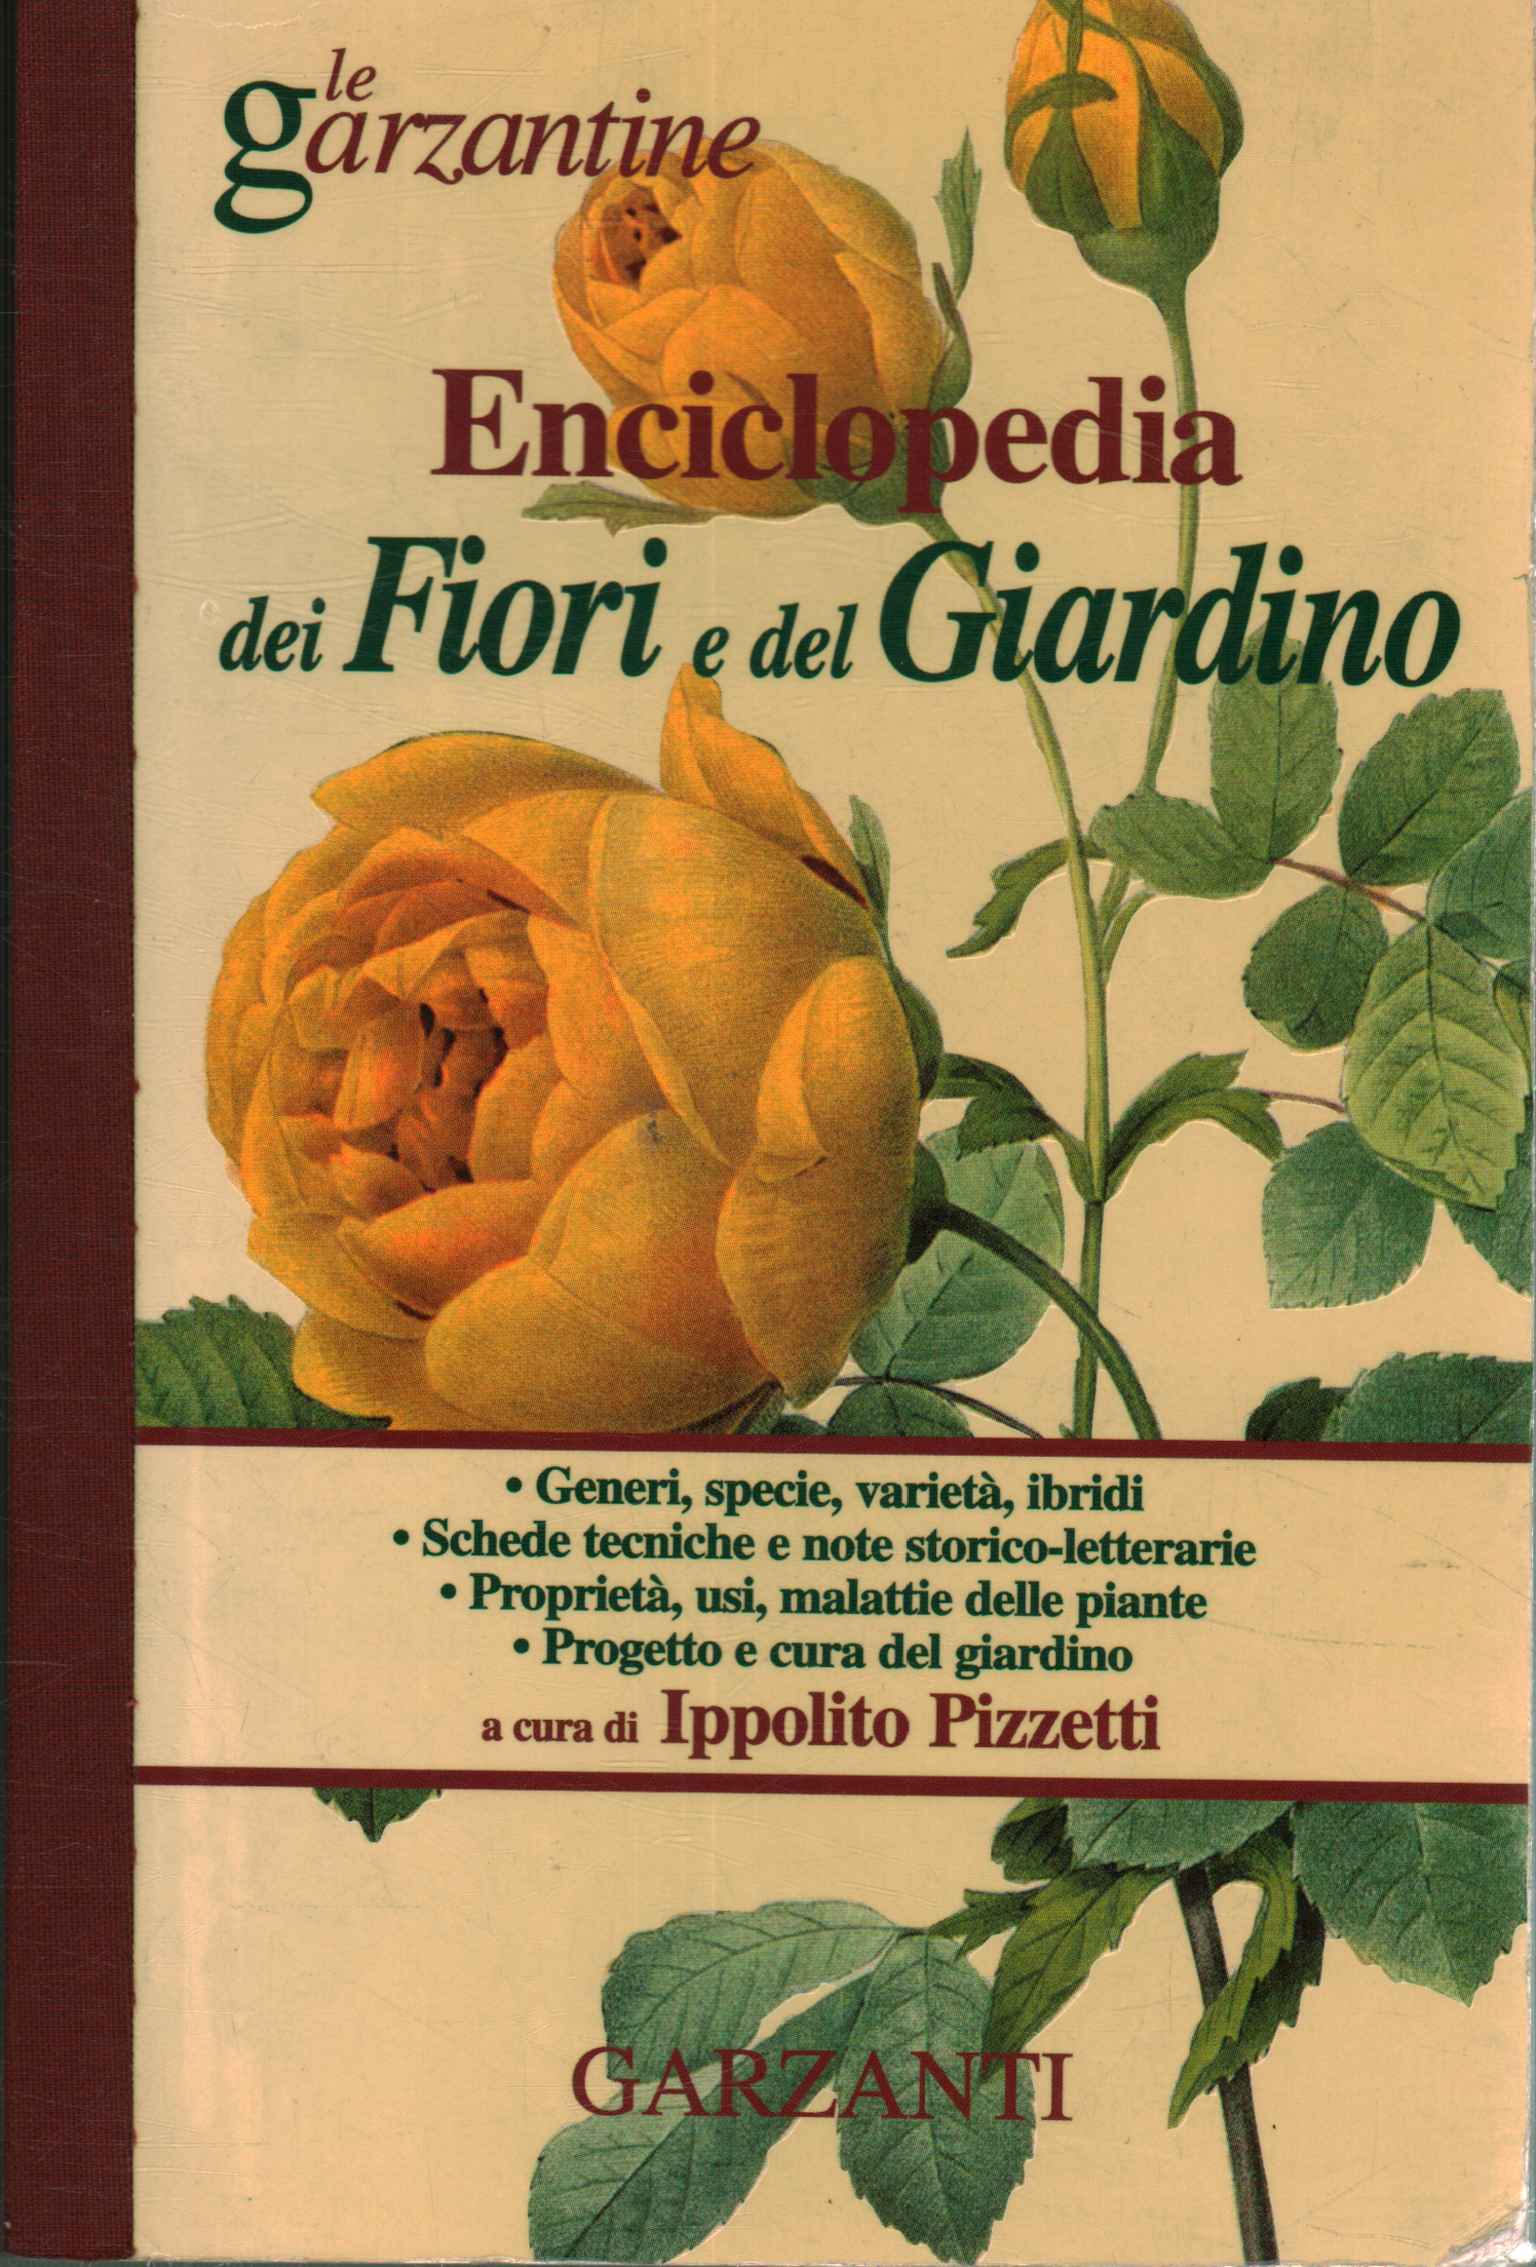 Encyclopedia of Flowers and Gardens